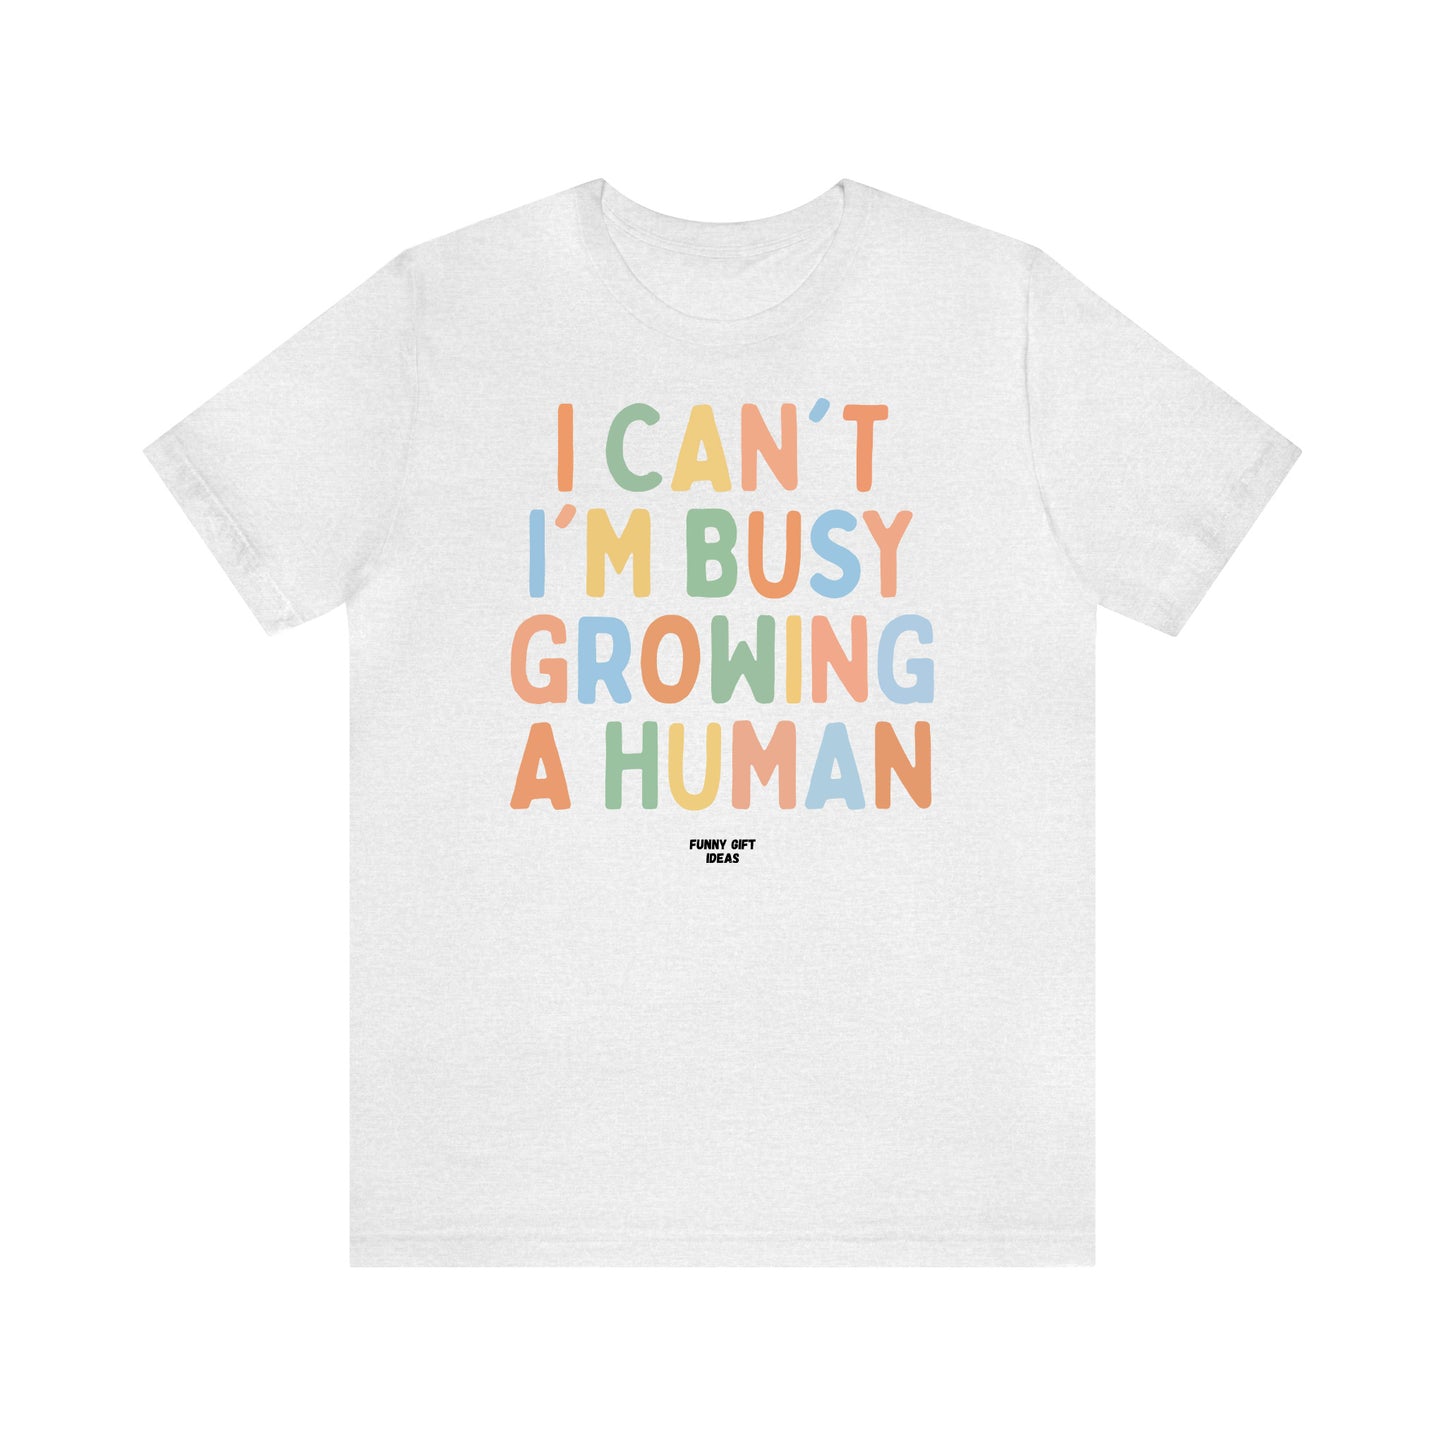 Funny Shirts for Women - I Can't I'm Busy Growing a Human - Women's T Shirts